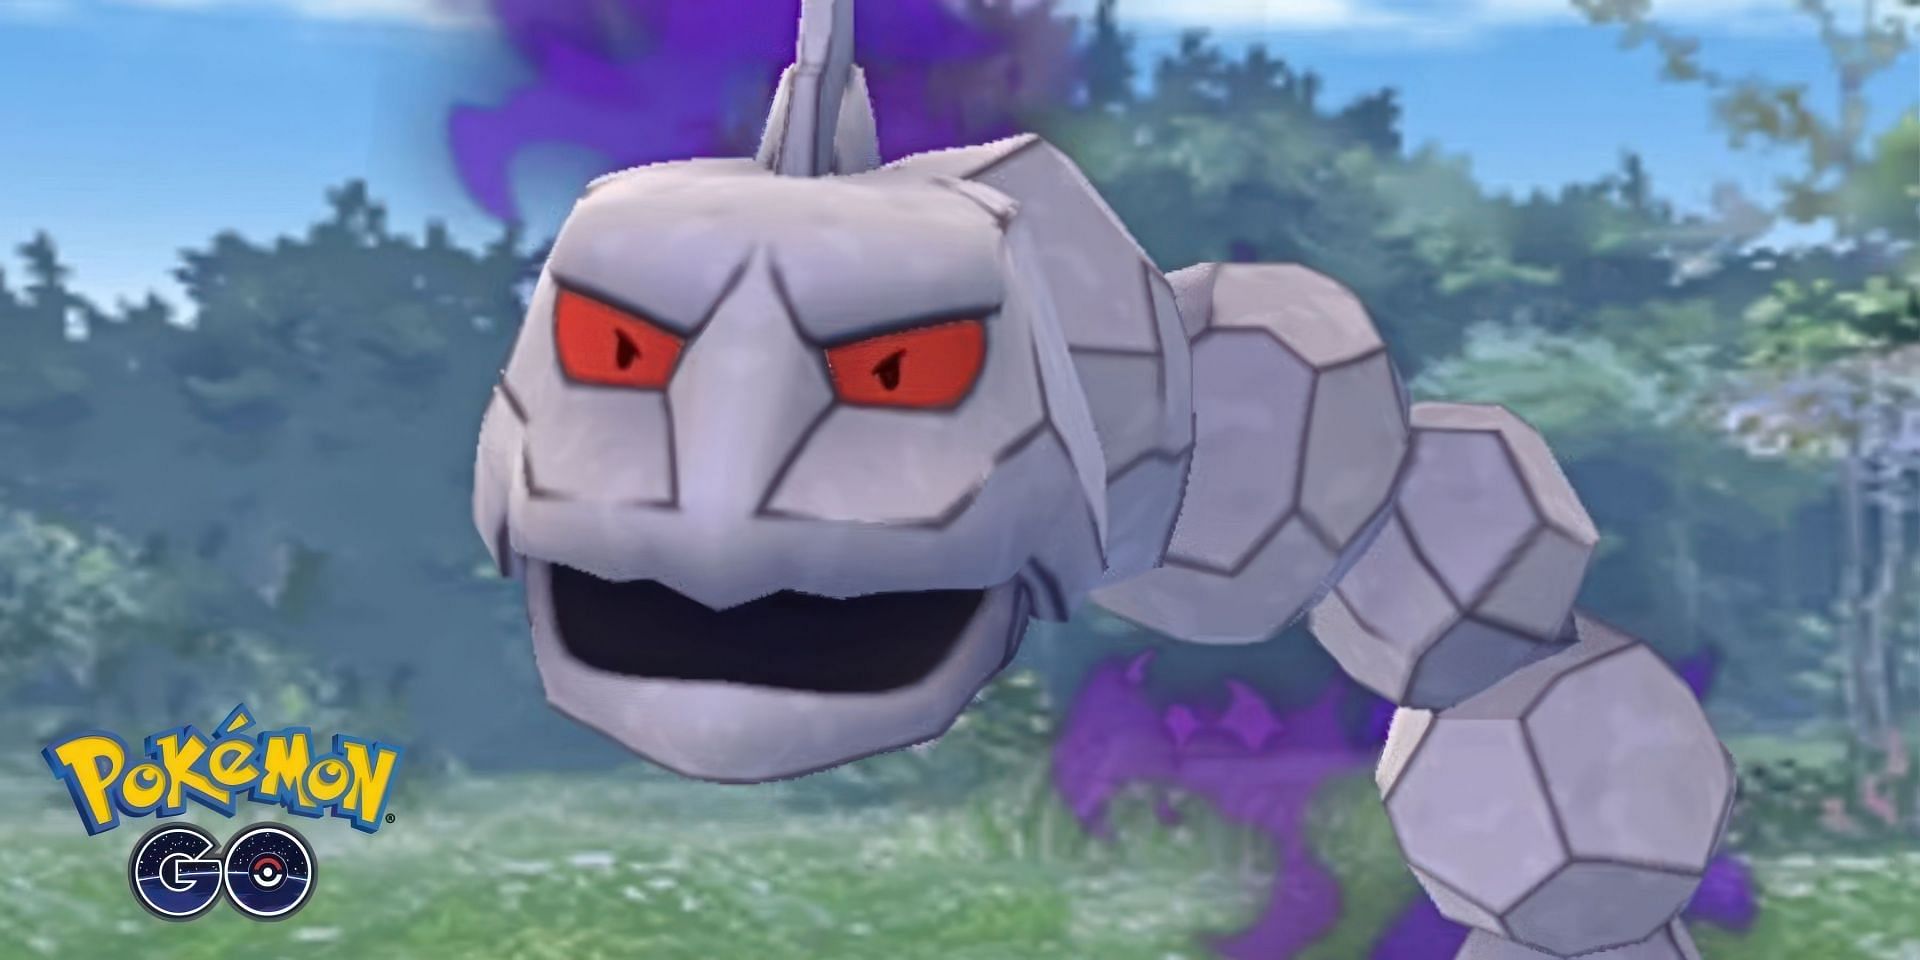 𝙒𝙃𝙔𝙇𝘿𝙀 on X: Shiny Onix and who??🤔😊 True Pokemon fans will